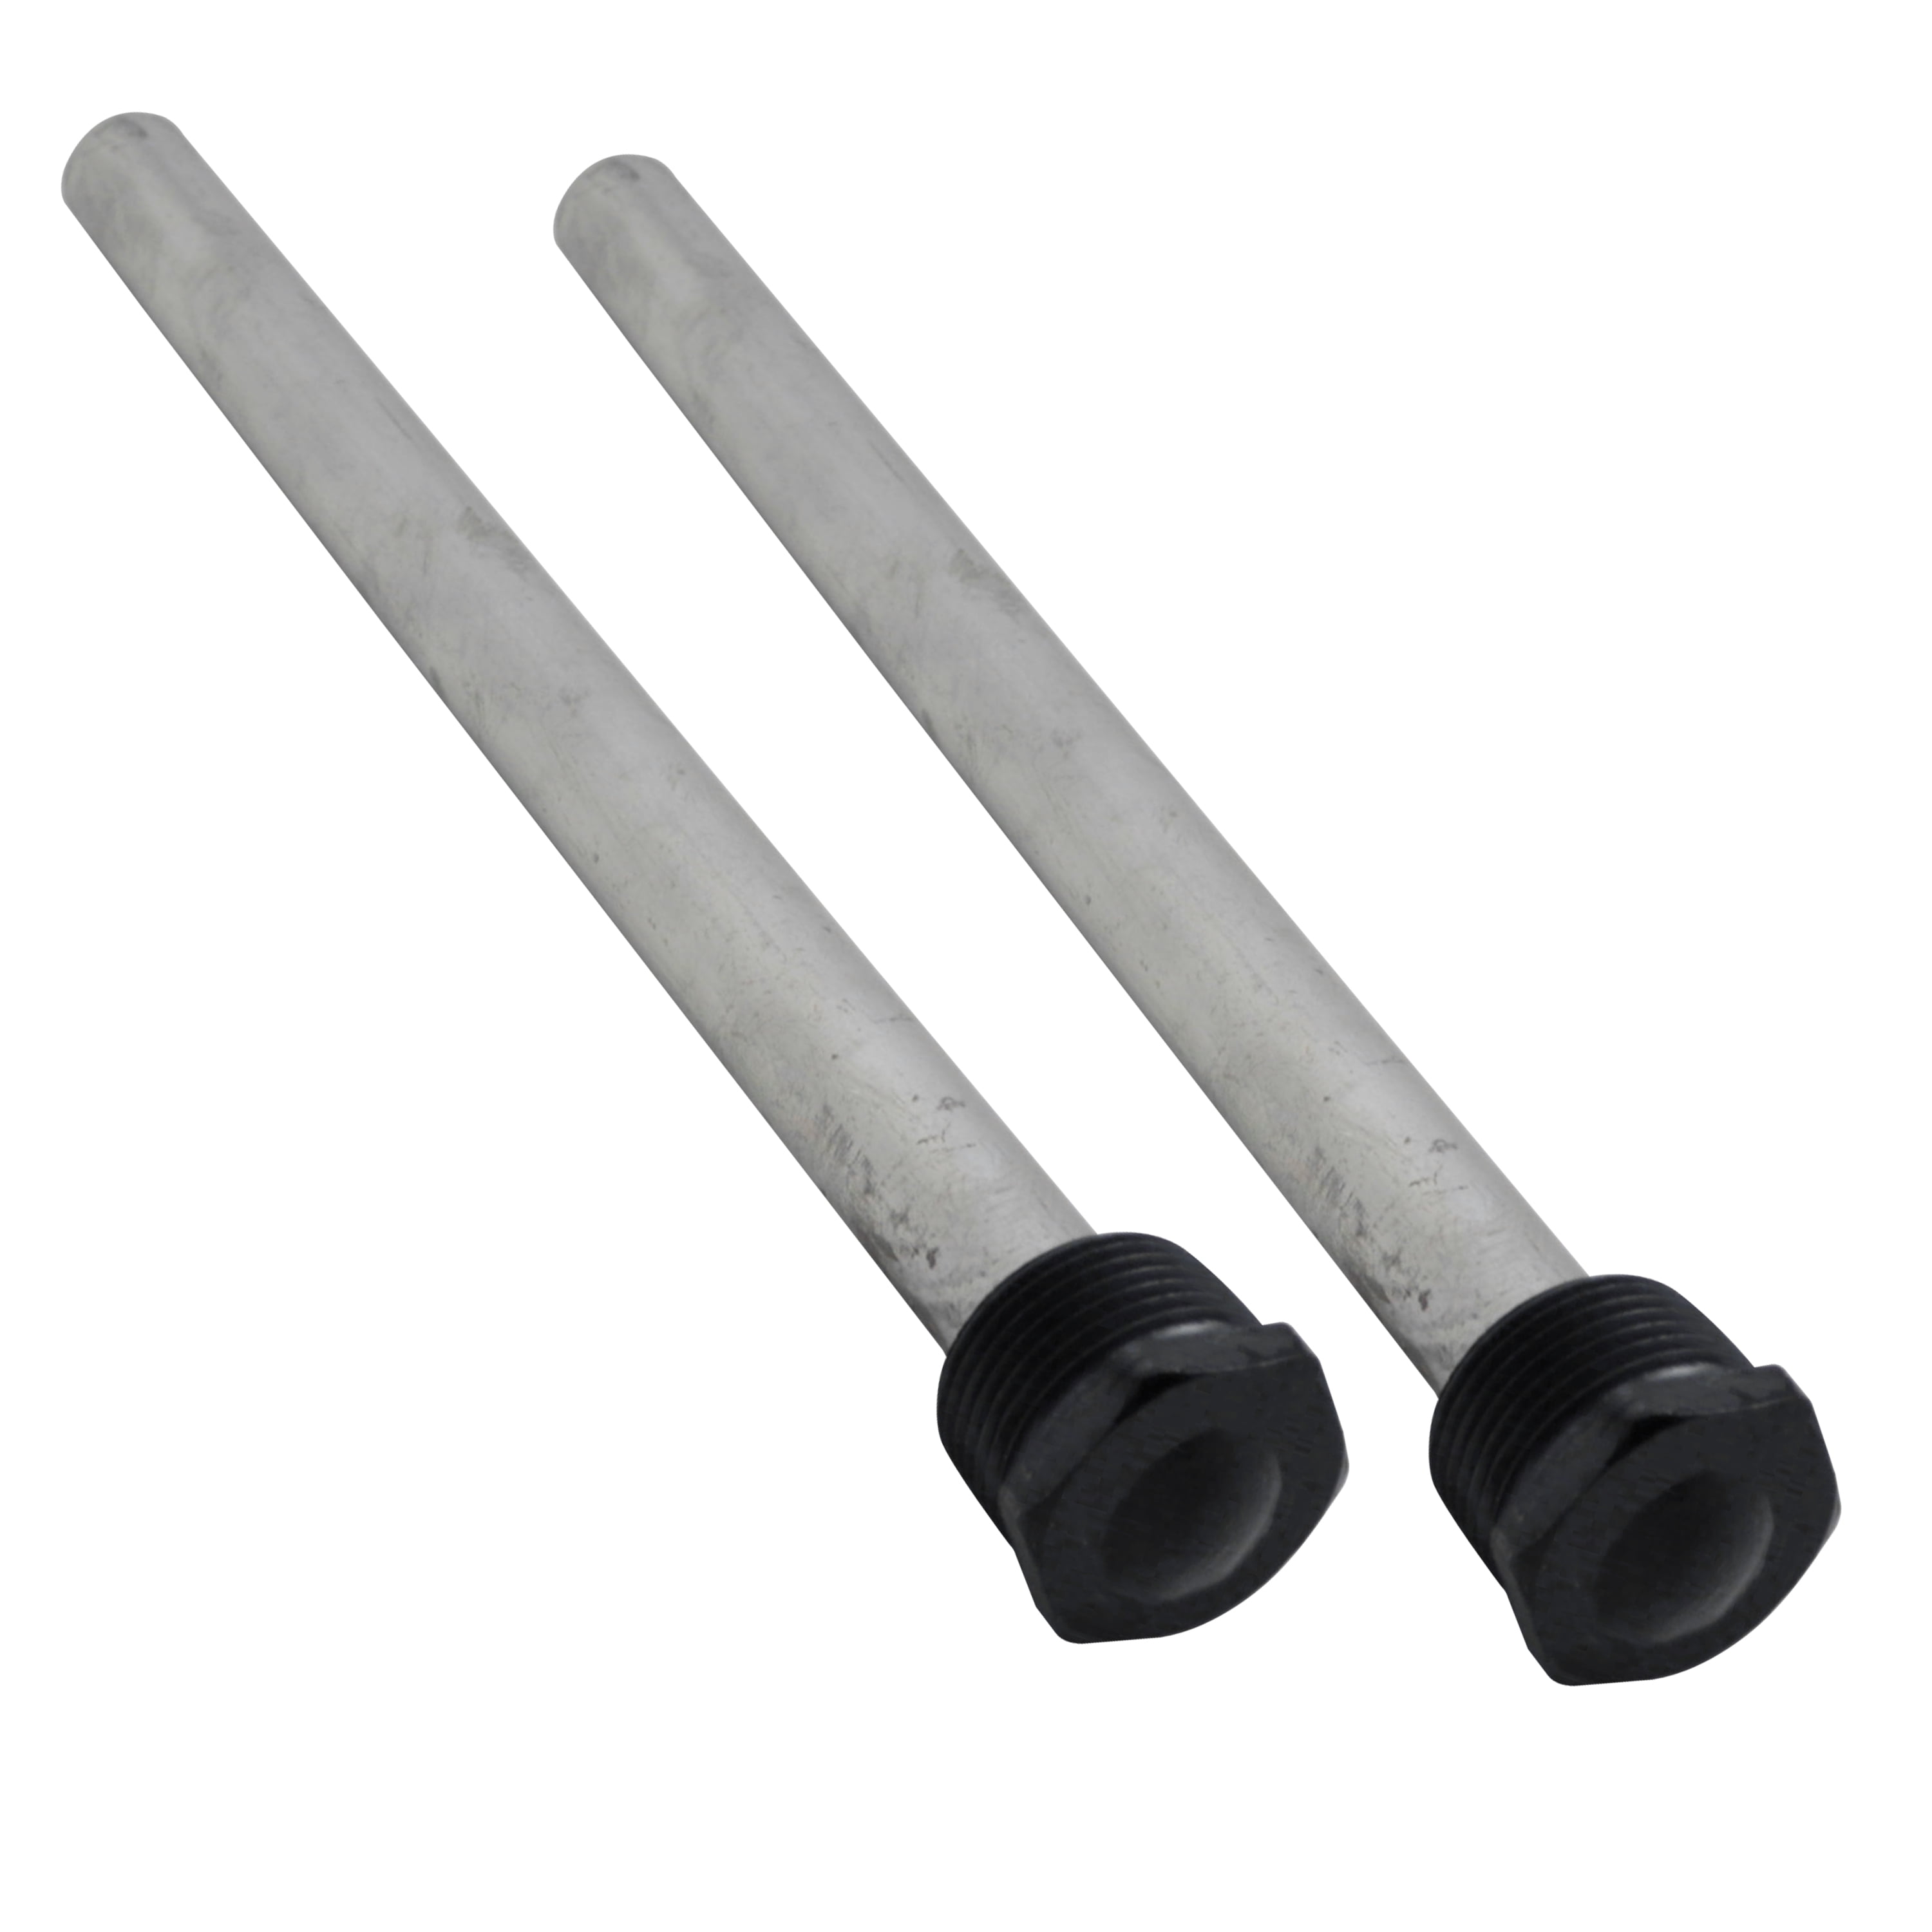 RV Water Heater Anode Rod Magnesium Anode Rod 9.25''Long & 3/4'' Thread